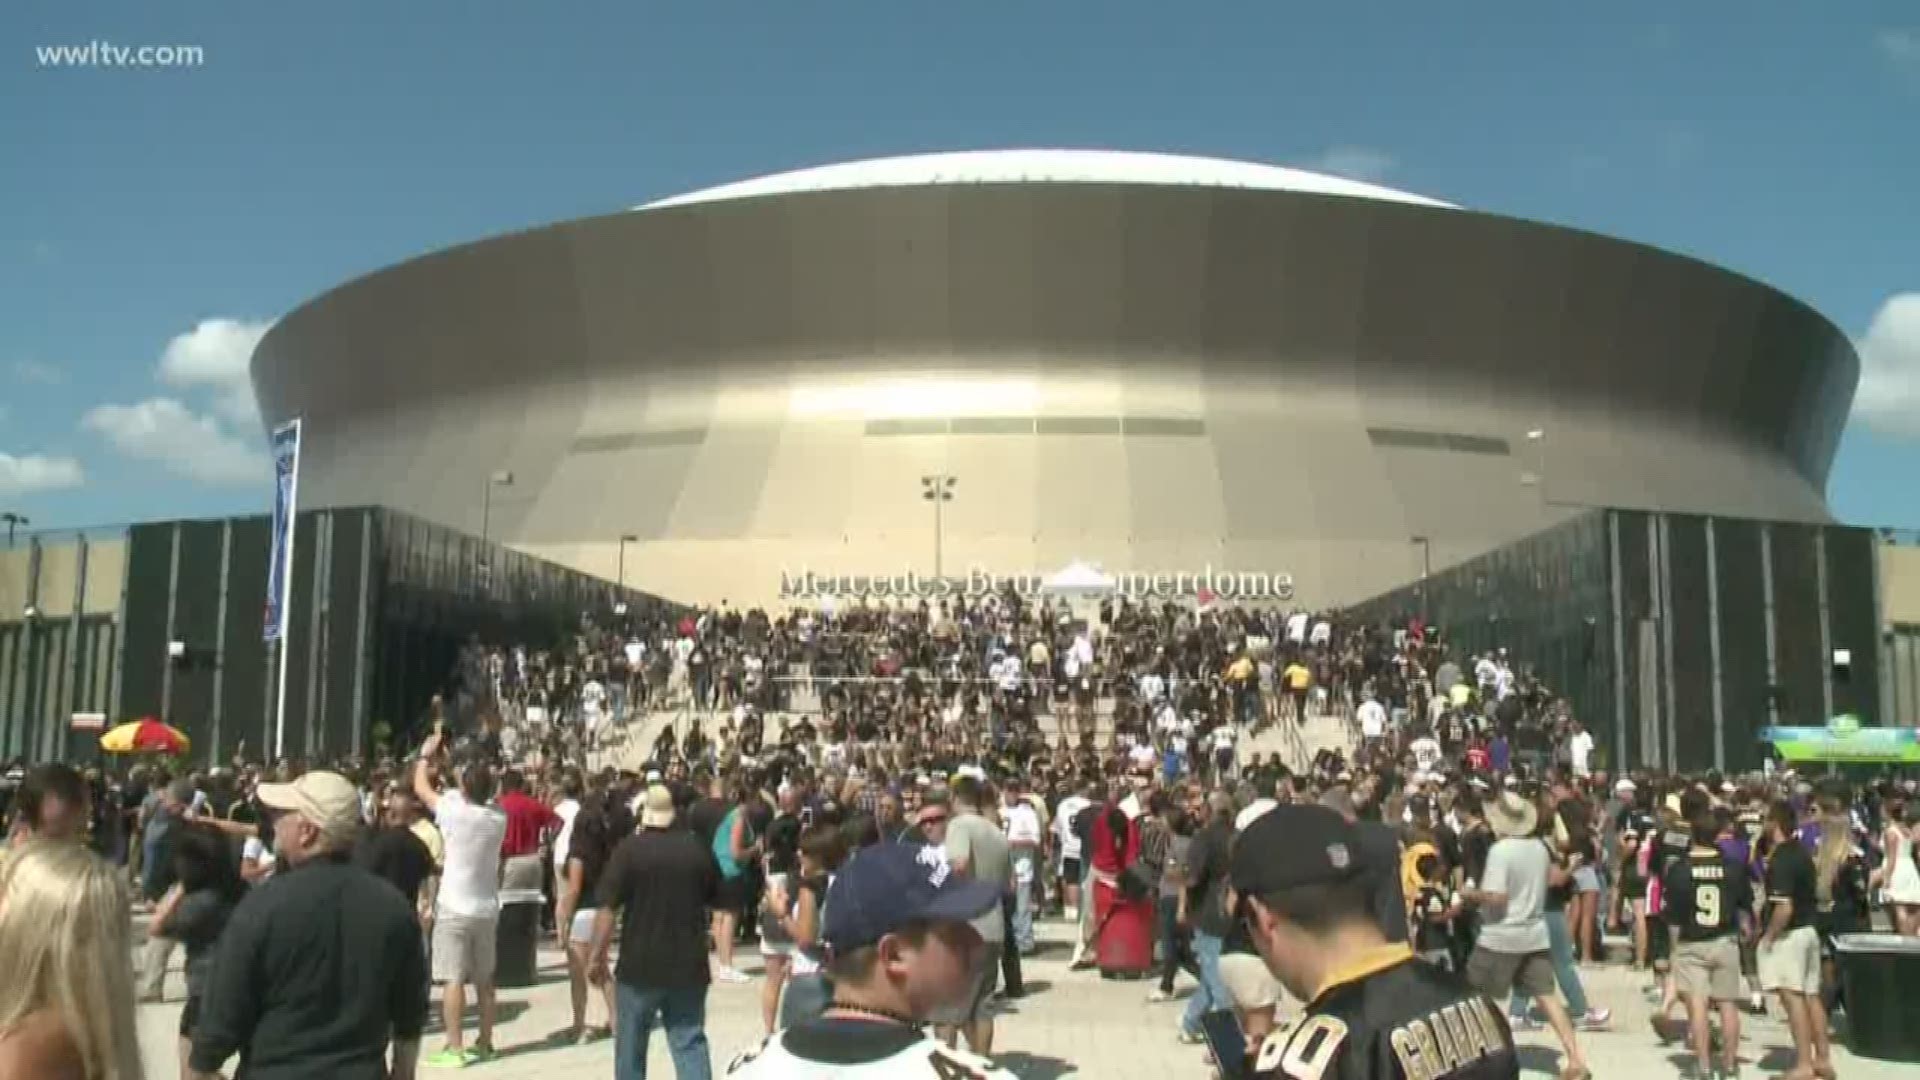 $450 million Superdome upgrade plan will keep Saints in city for 30 years, governor says